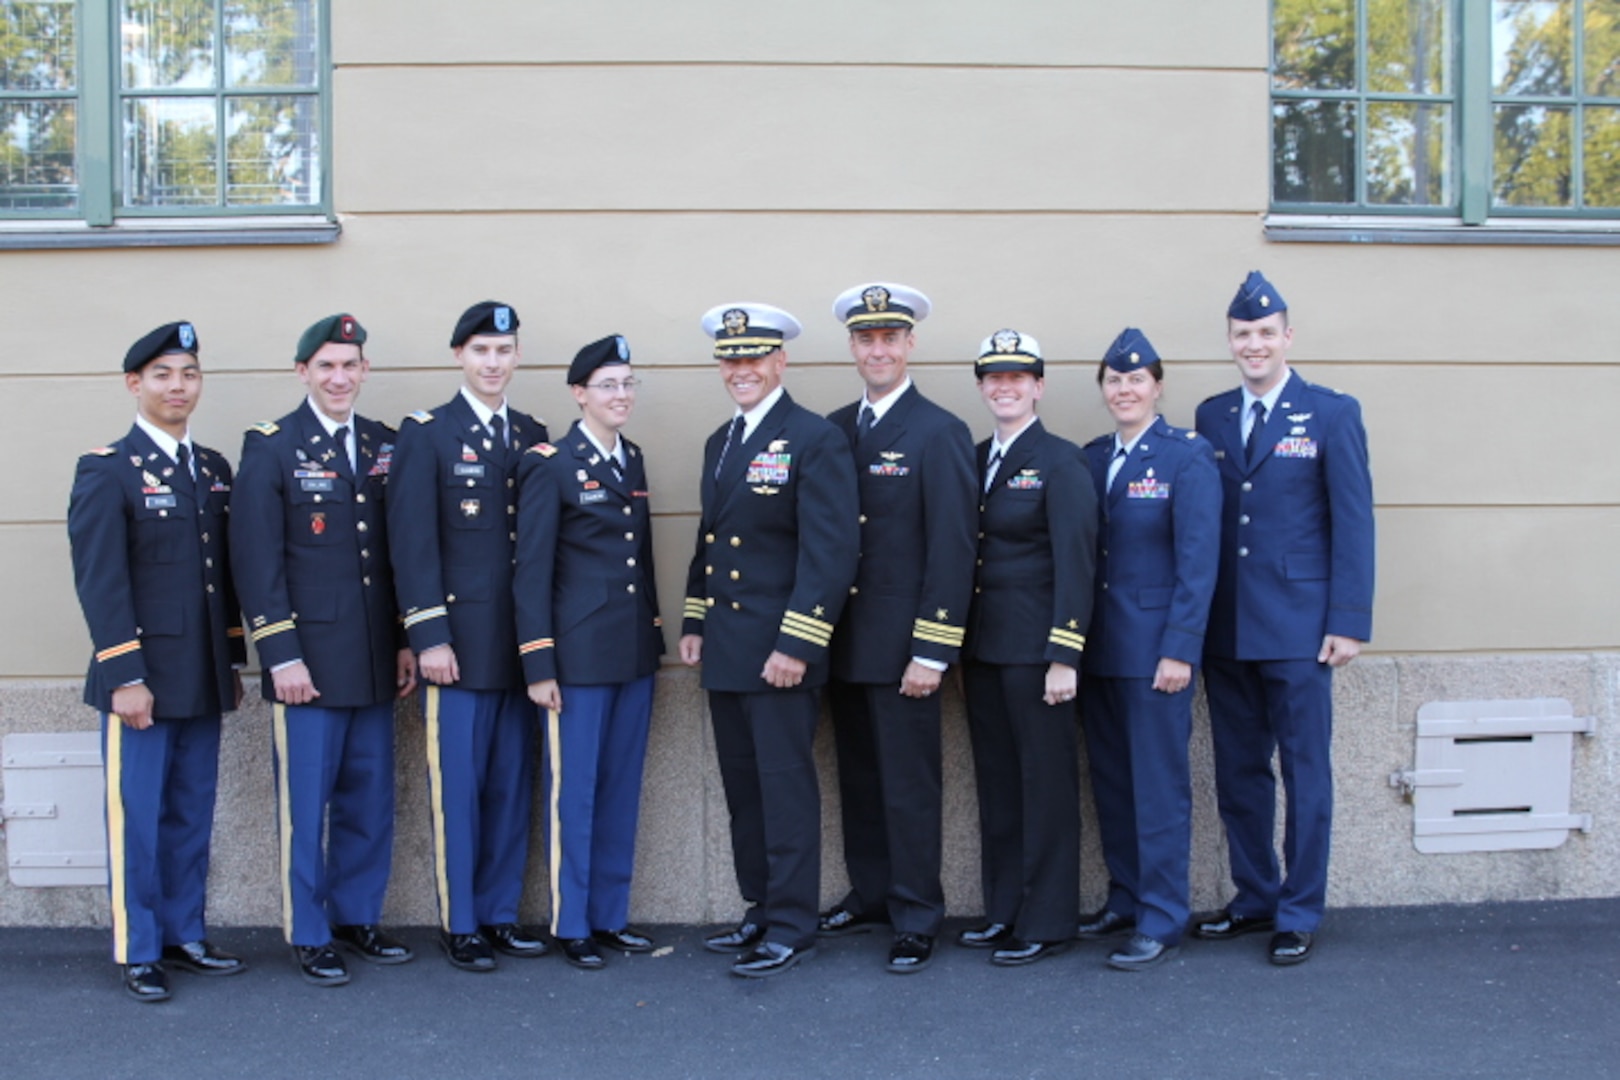 The 2013 U.S. Armed Forces Orienteering Team from Left to Right: 1LT Joshua Wang (Army), LTC Liam Collins (Army), 1LT Kevin Culberg (Army), 2LT Hannah Culberg (Army), CDR Grant Staats (Navy), LCDR Jeremy Debons (Navy), LT Virginia Debons (Navy), Maj Maiya Anderson (USAF), Maj Joseph Burkhead (USAF)at the 2013 CISM World Orienteering Military Championship hosted by the Swedish Armed Forces in Eksjo, Sweden from 26 August to 1 September.